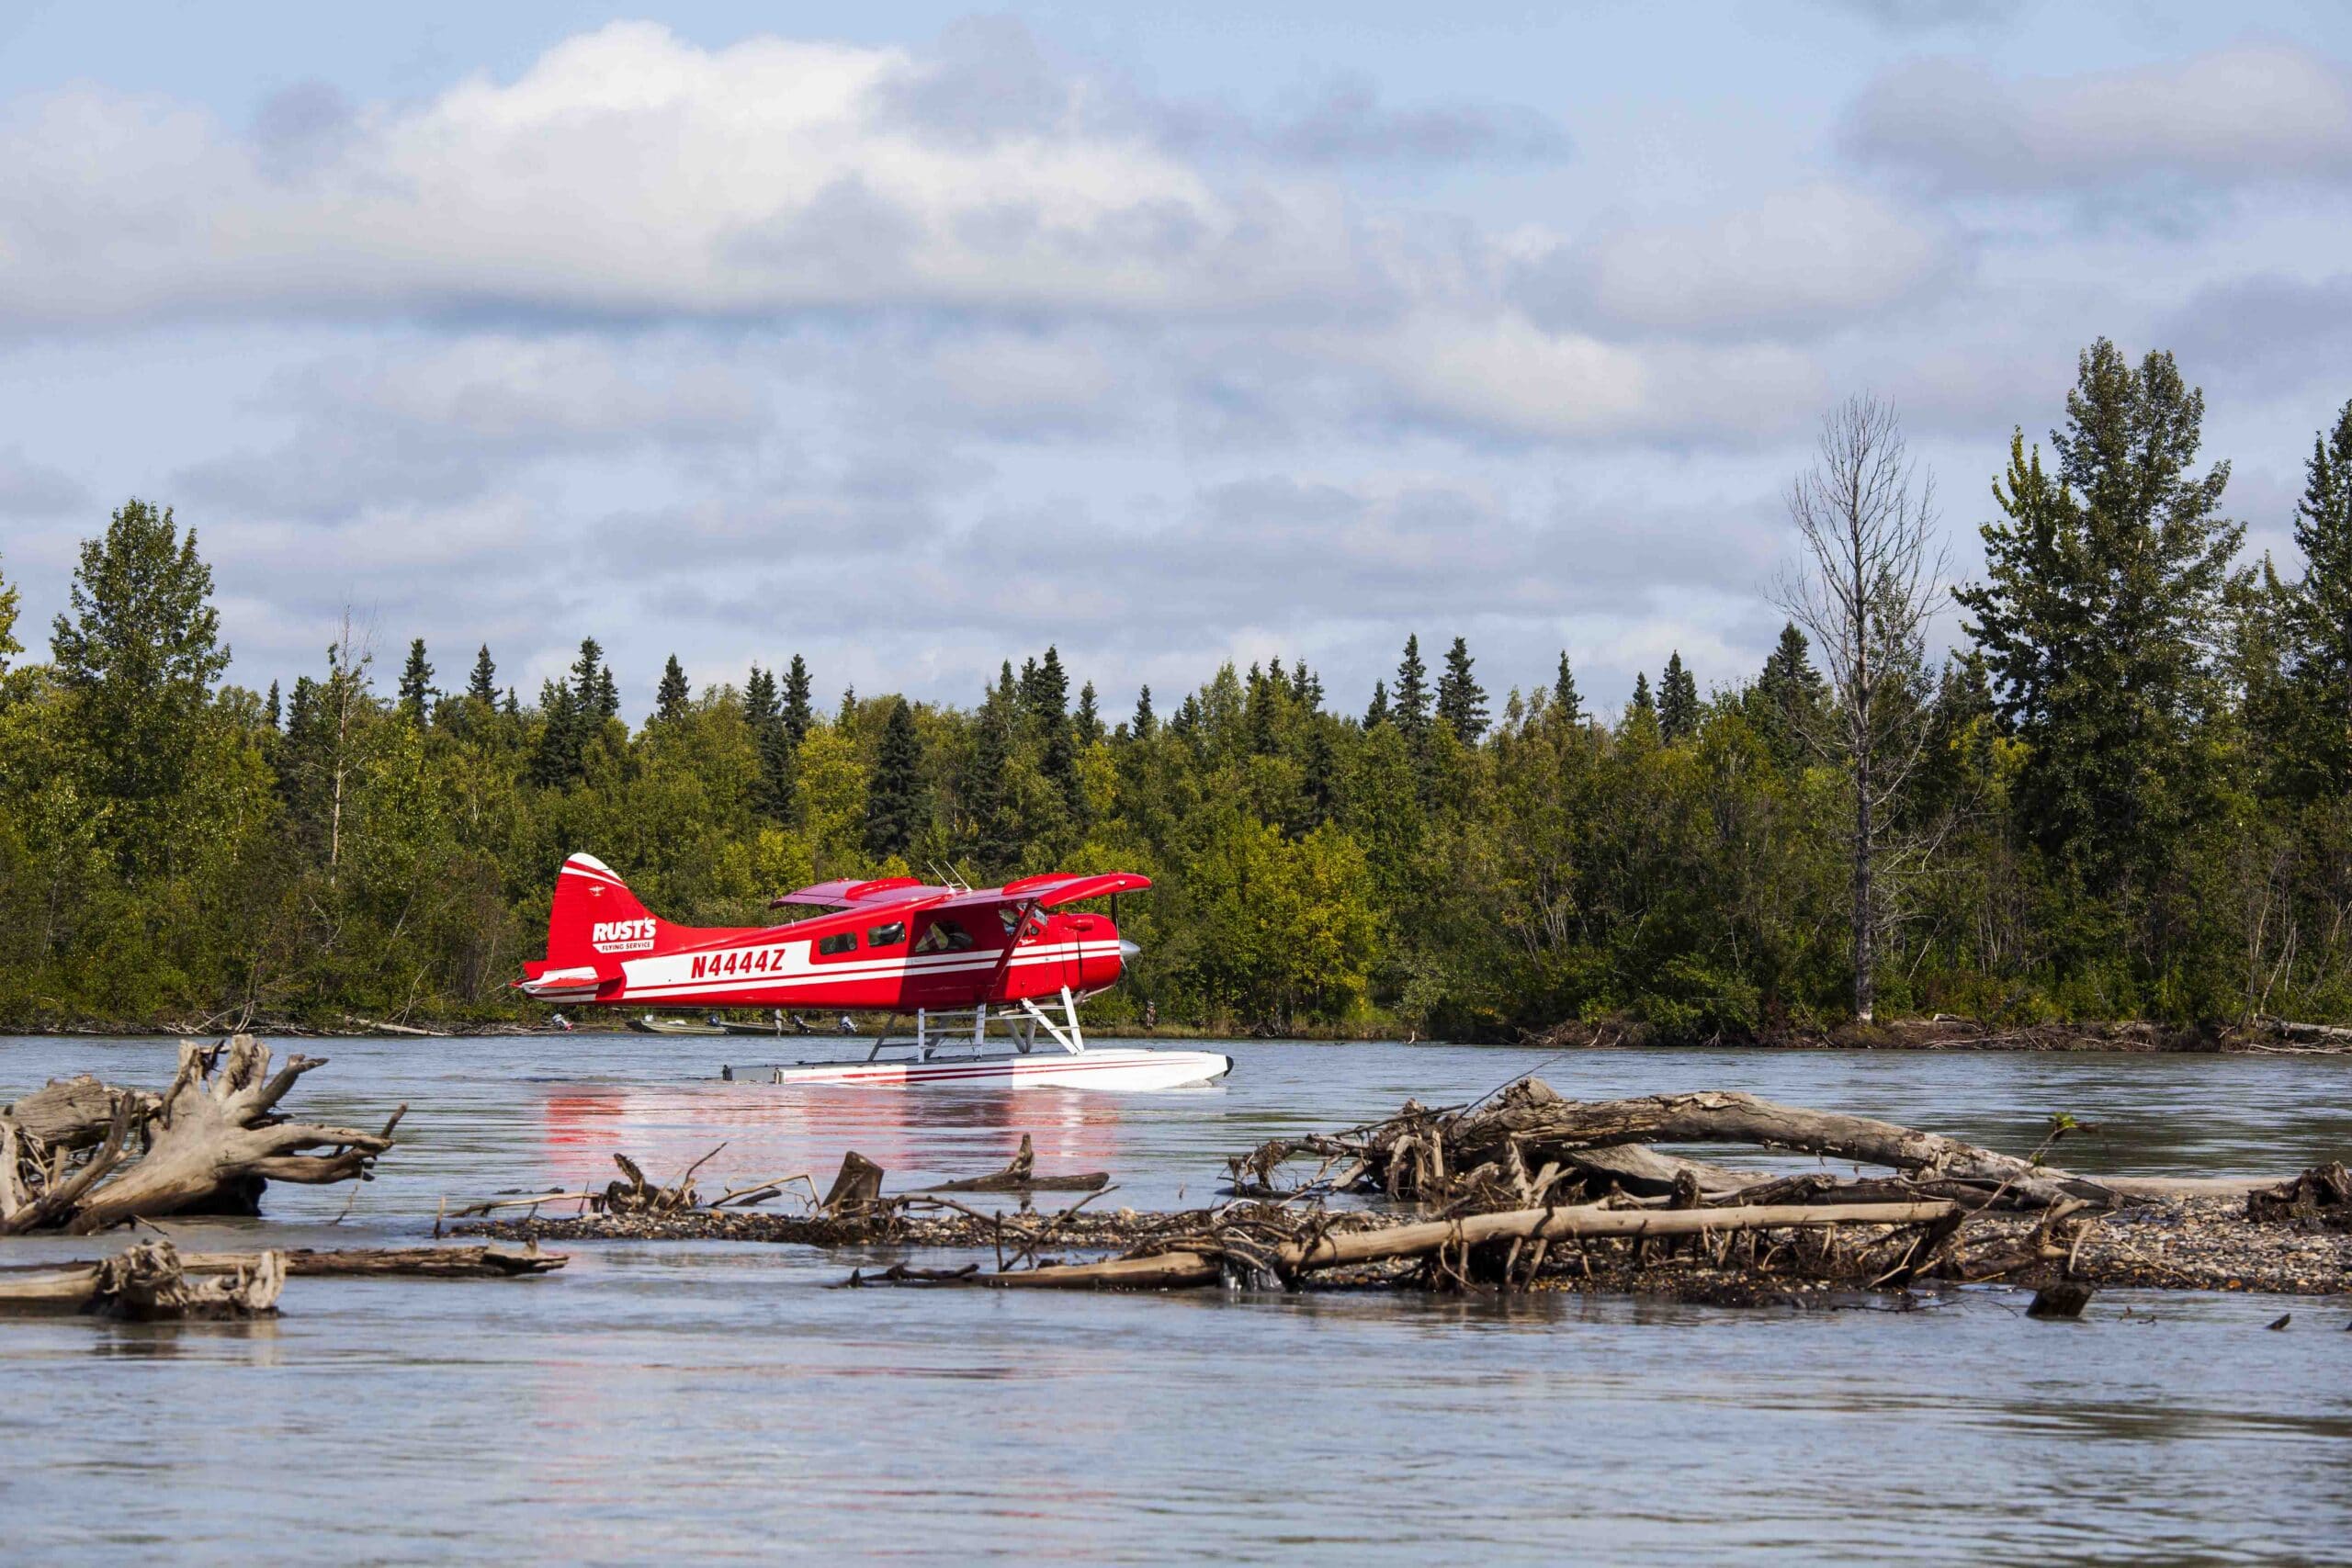 Red Seaplane in the water wood in the front trees in the back